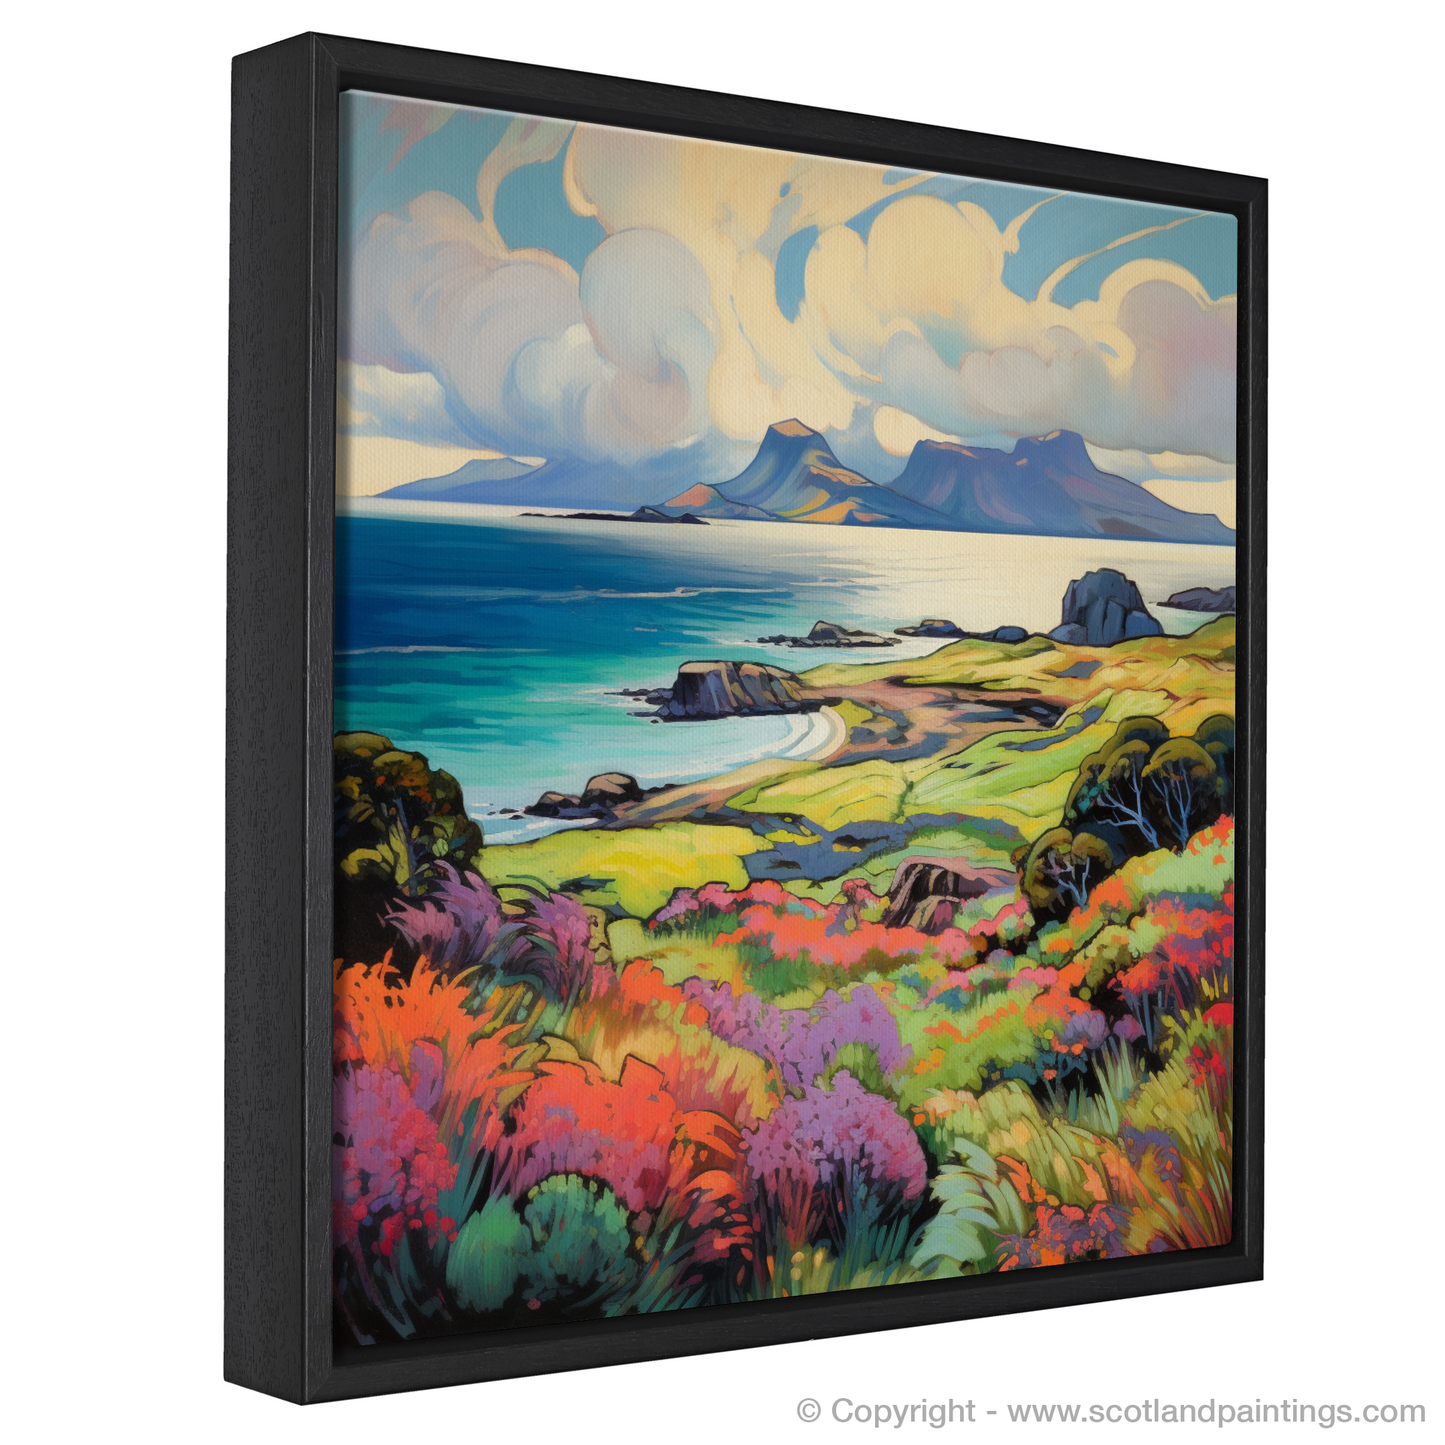 Painting and Art Print of Isle of Eigg, Inner Hebrides in summer entitled "Isle of Eigg Summer Symphony".